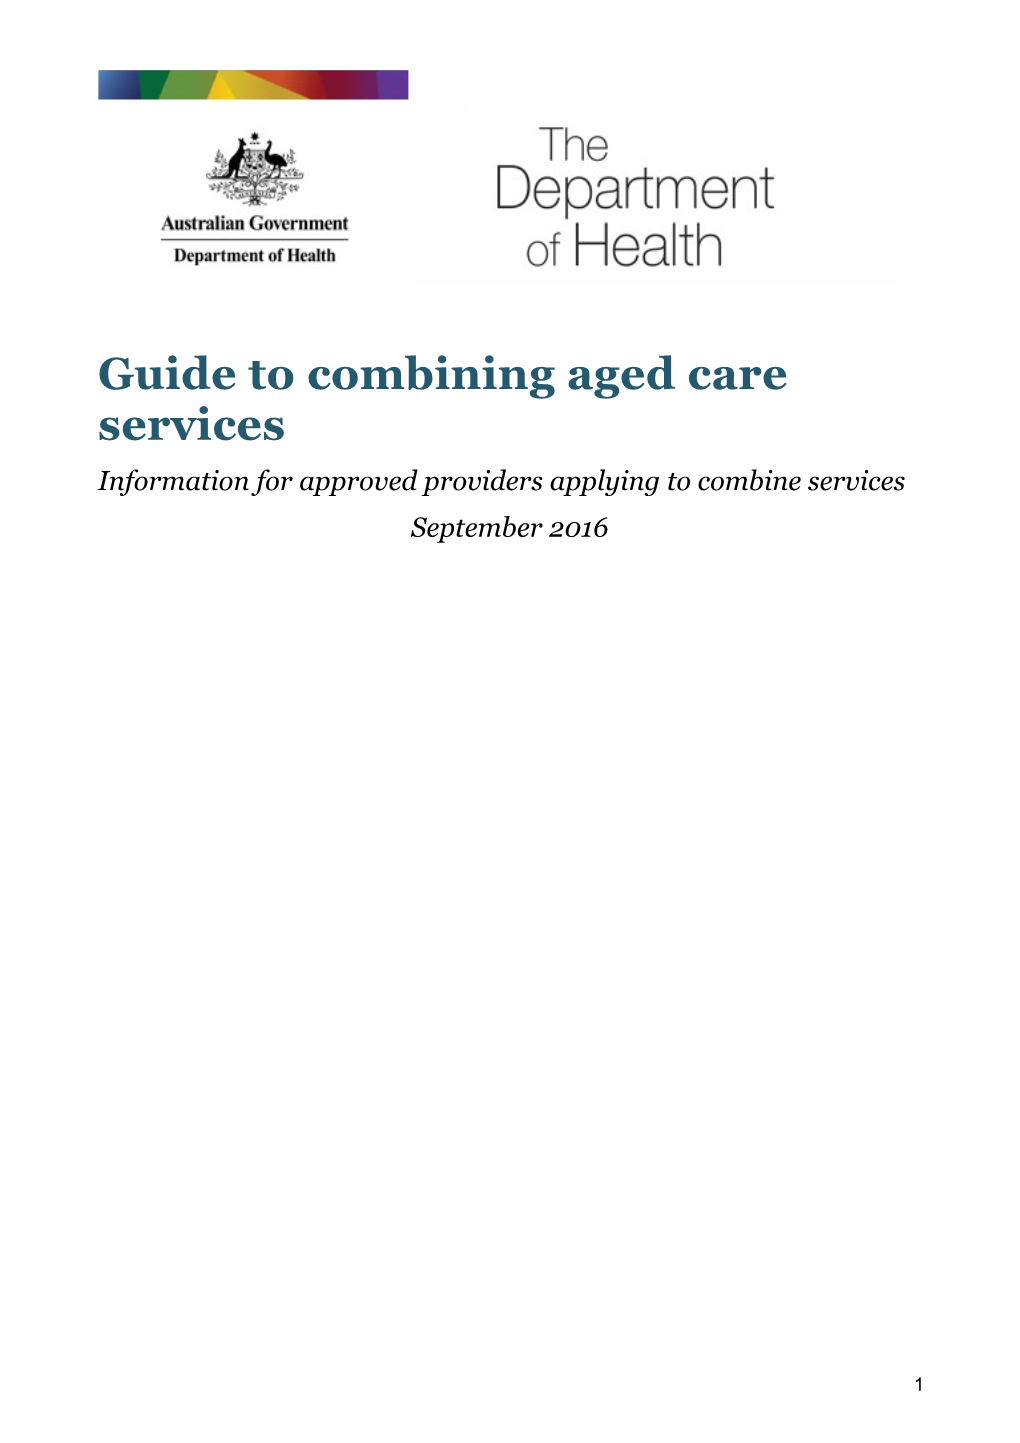 Guide to Combining Aged Care Services